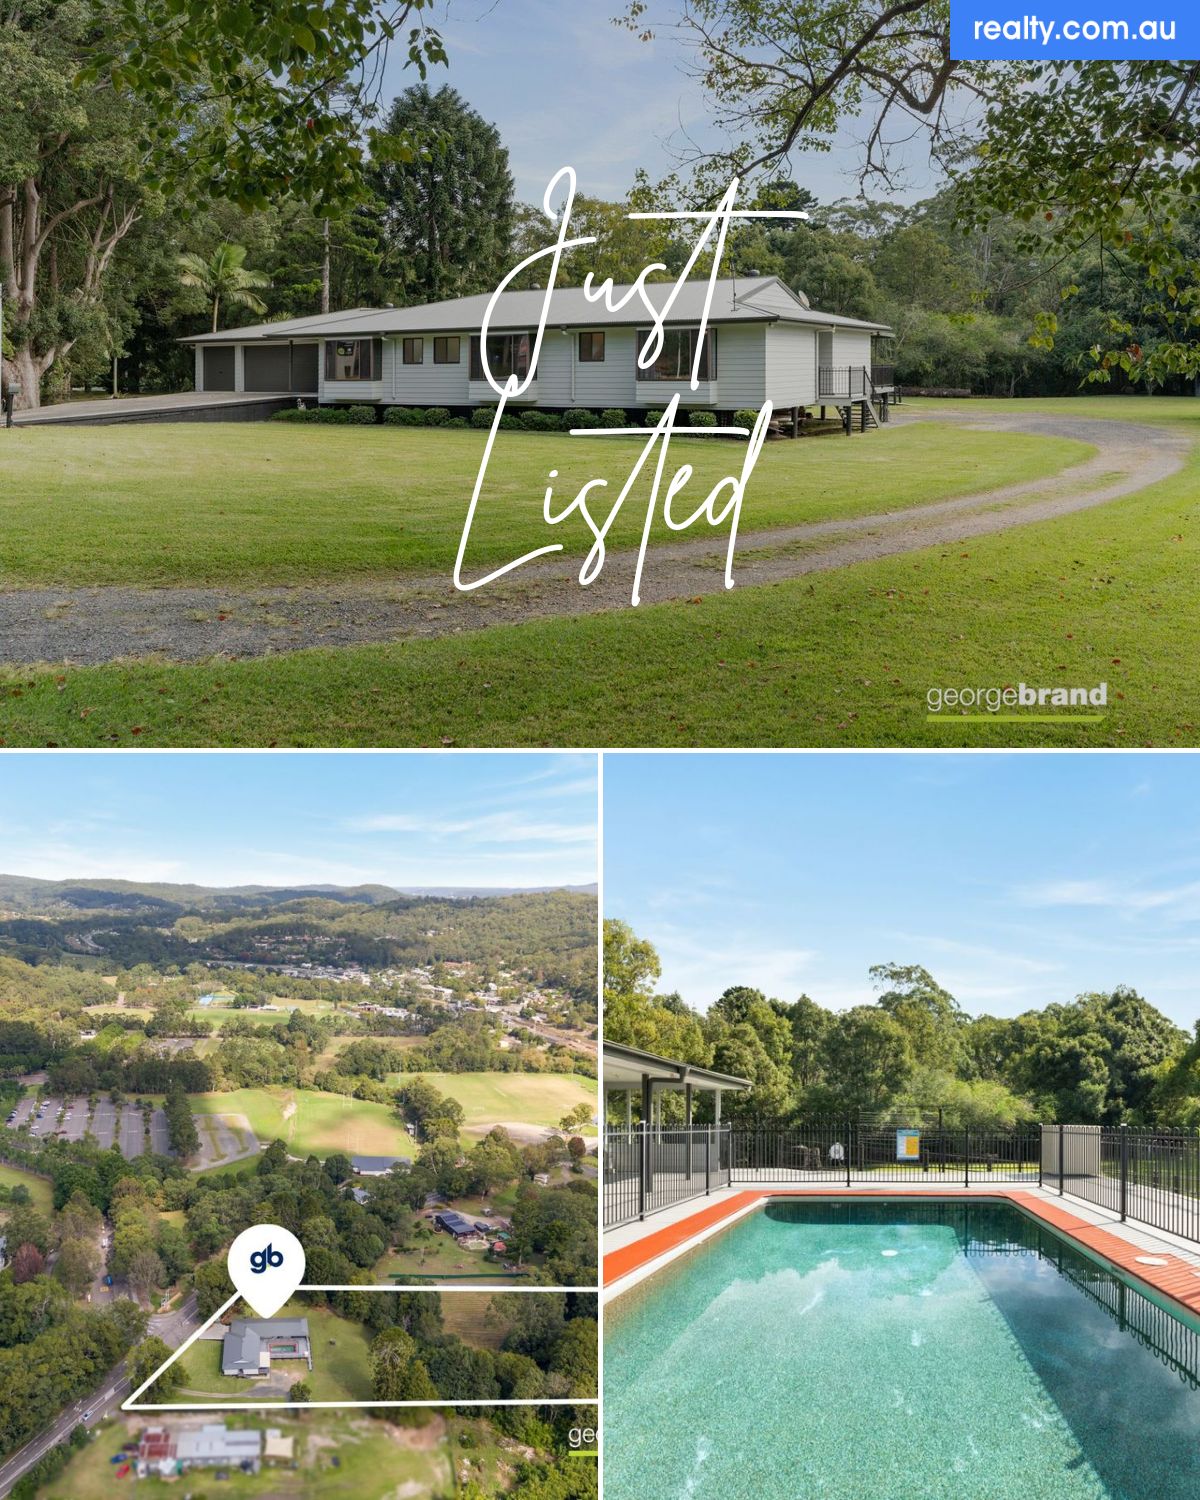 19 Chittaway Road, Ourimbah, NSW 2258 | Realty.com.au